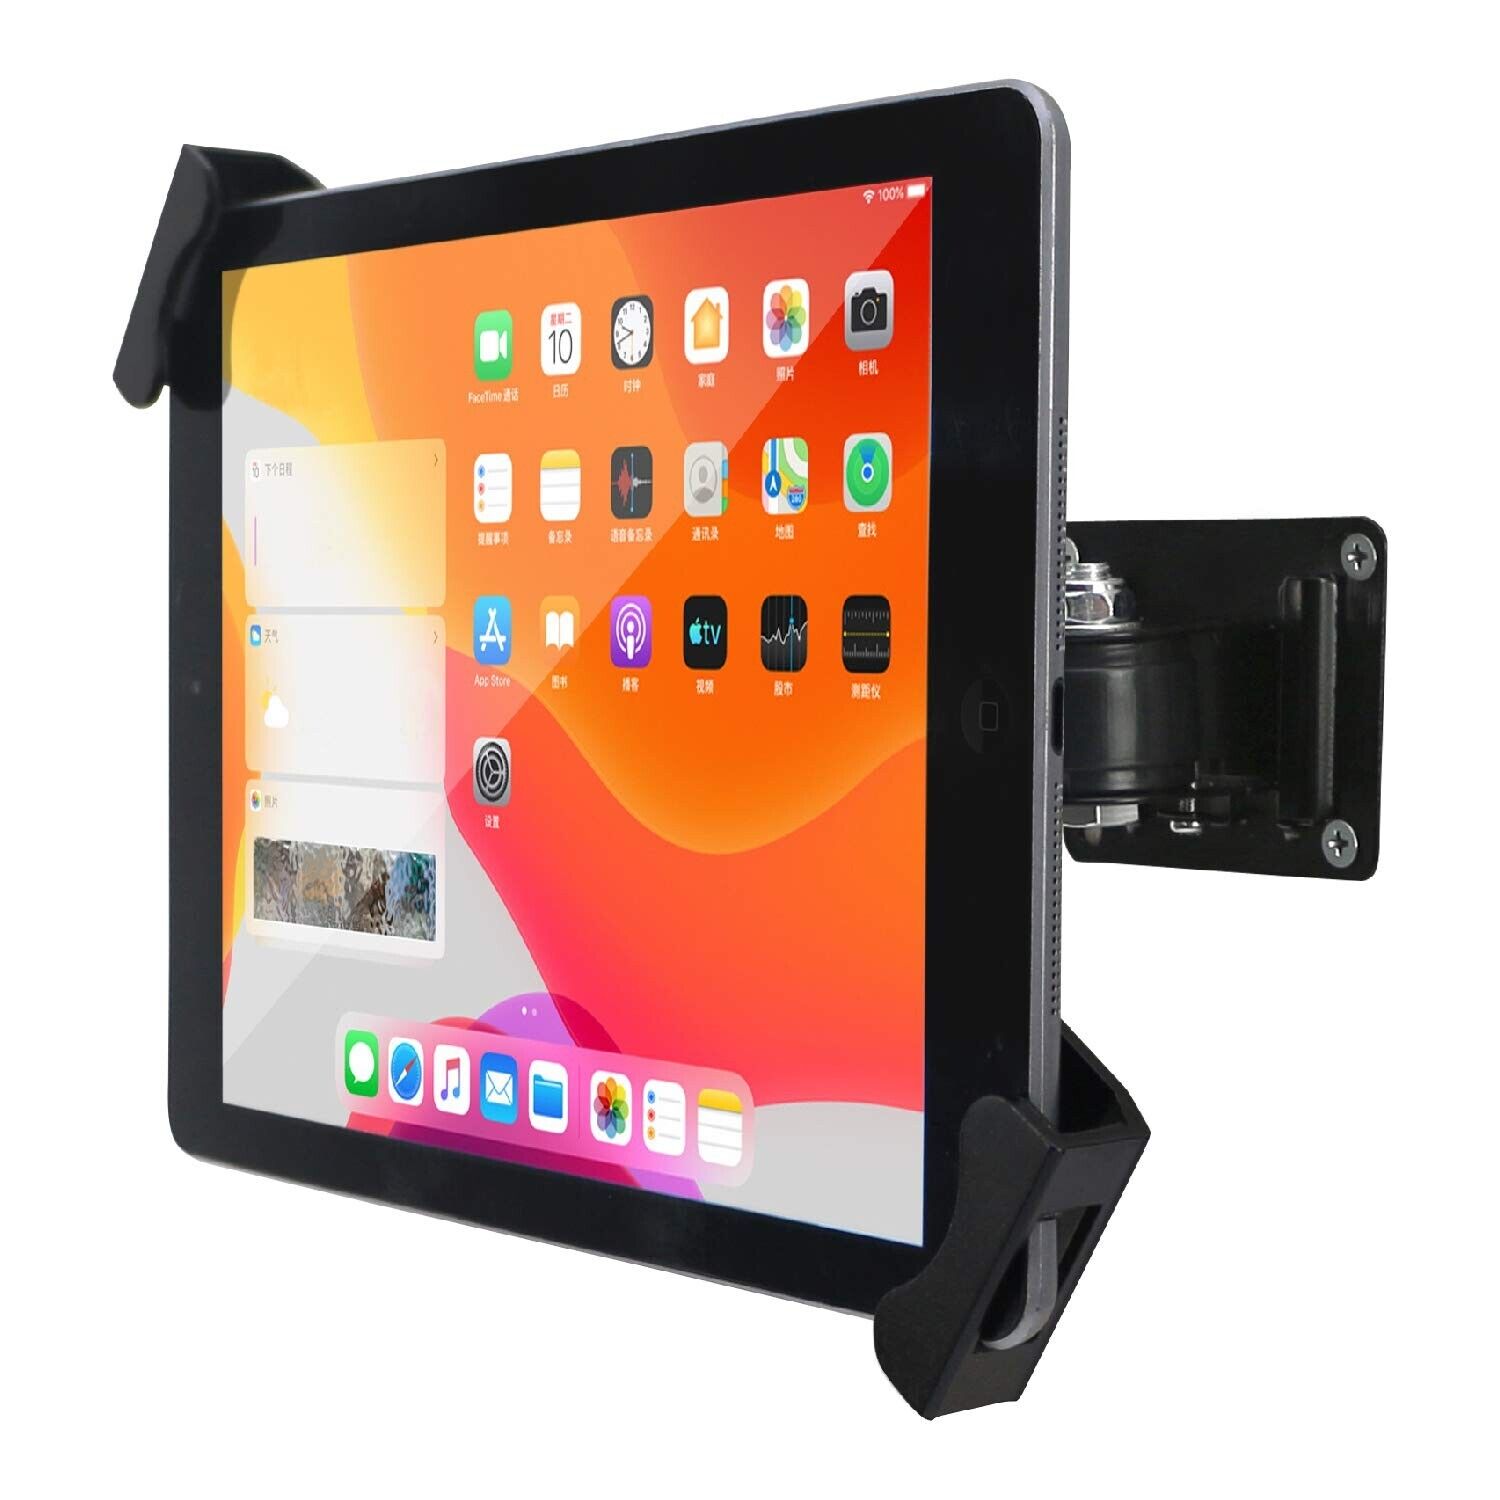 WeSTRUGGLE Tablet Wall Mount Holder with Lock and Key, Rotate Design Arbitrar...